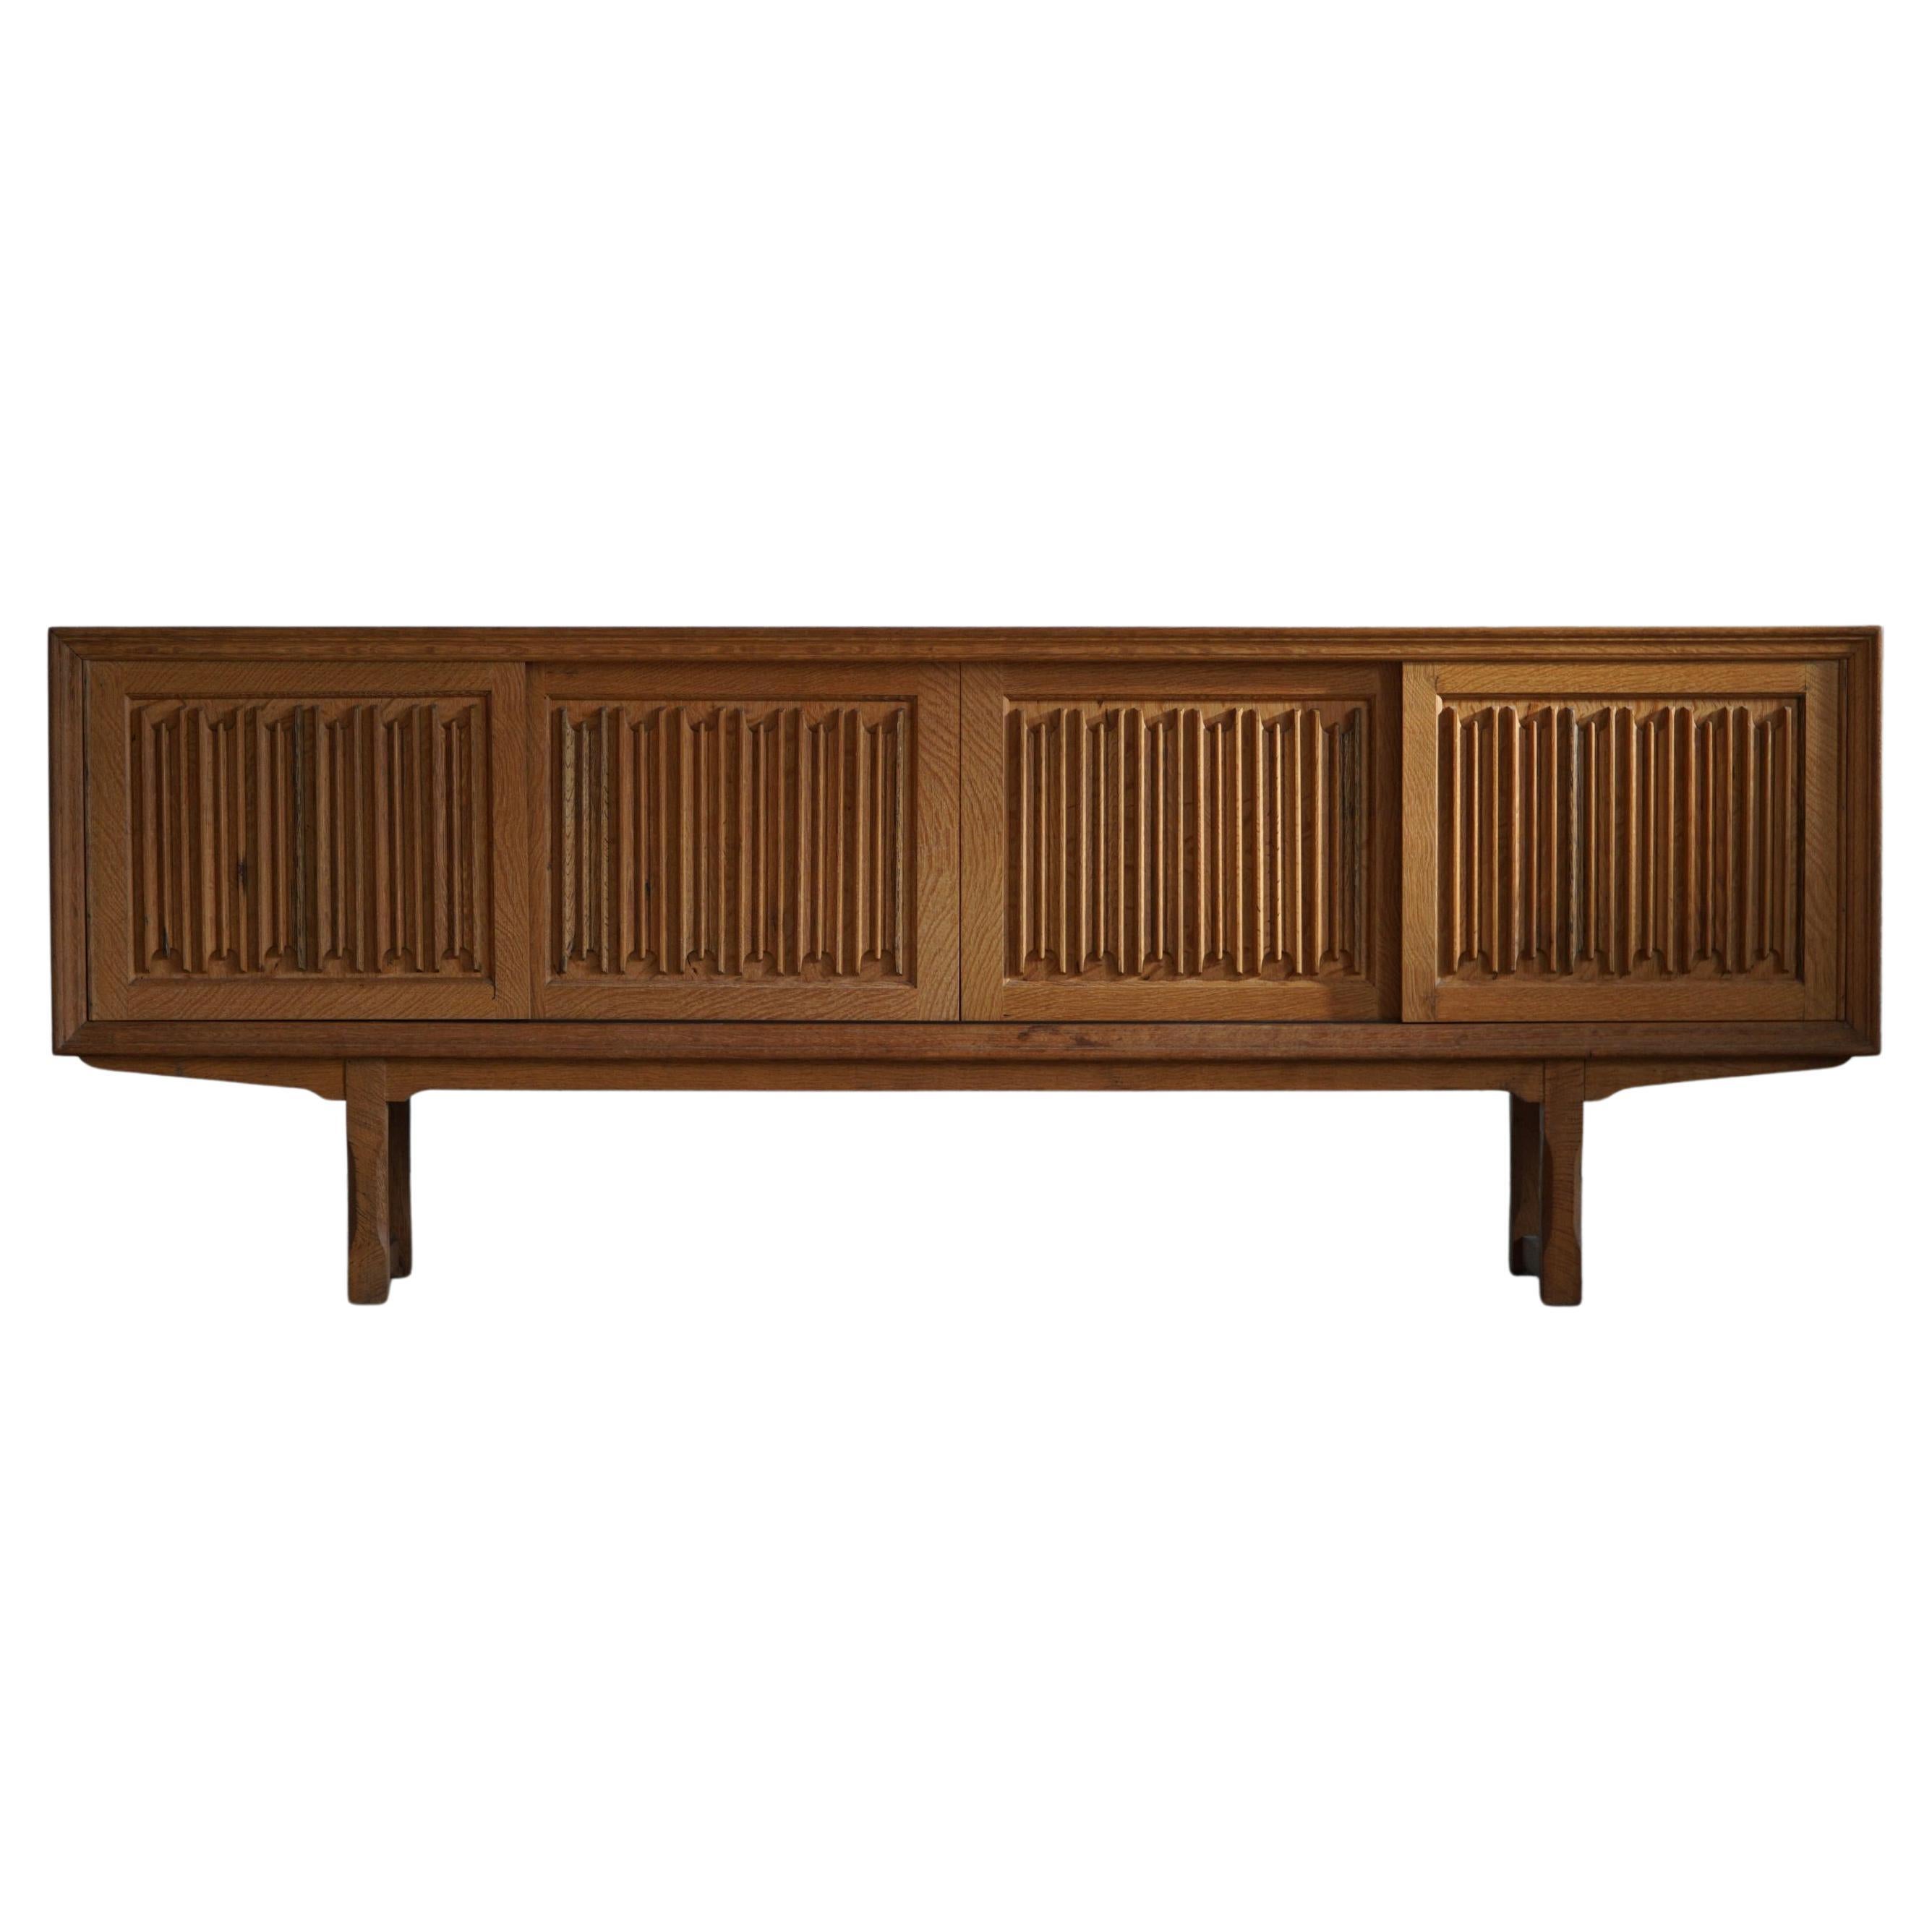 Low modern sideboard, made in oak. Crafted by a Danish cabinetmaker, ca 1950s.
Four sliding doors, inside storage and drawers.

A great patina and a nice sculptural front design. 

With a heavy focus on functionality, this design style leans